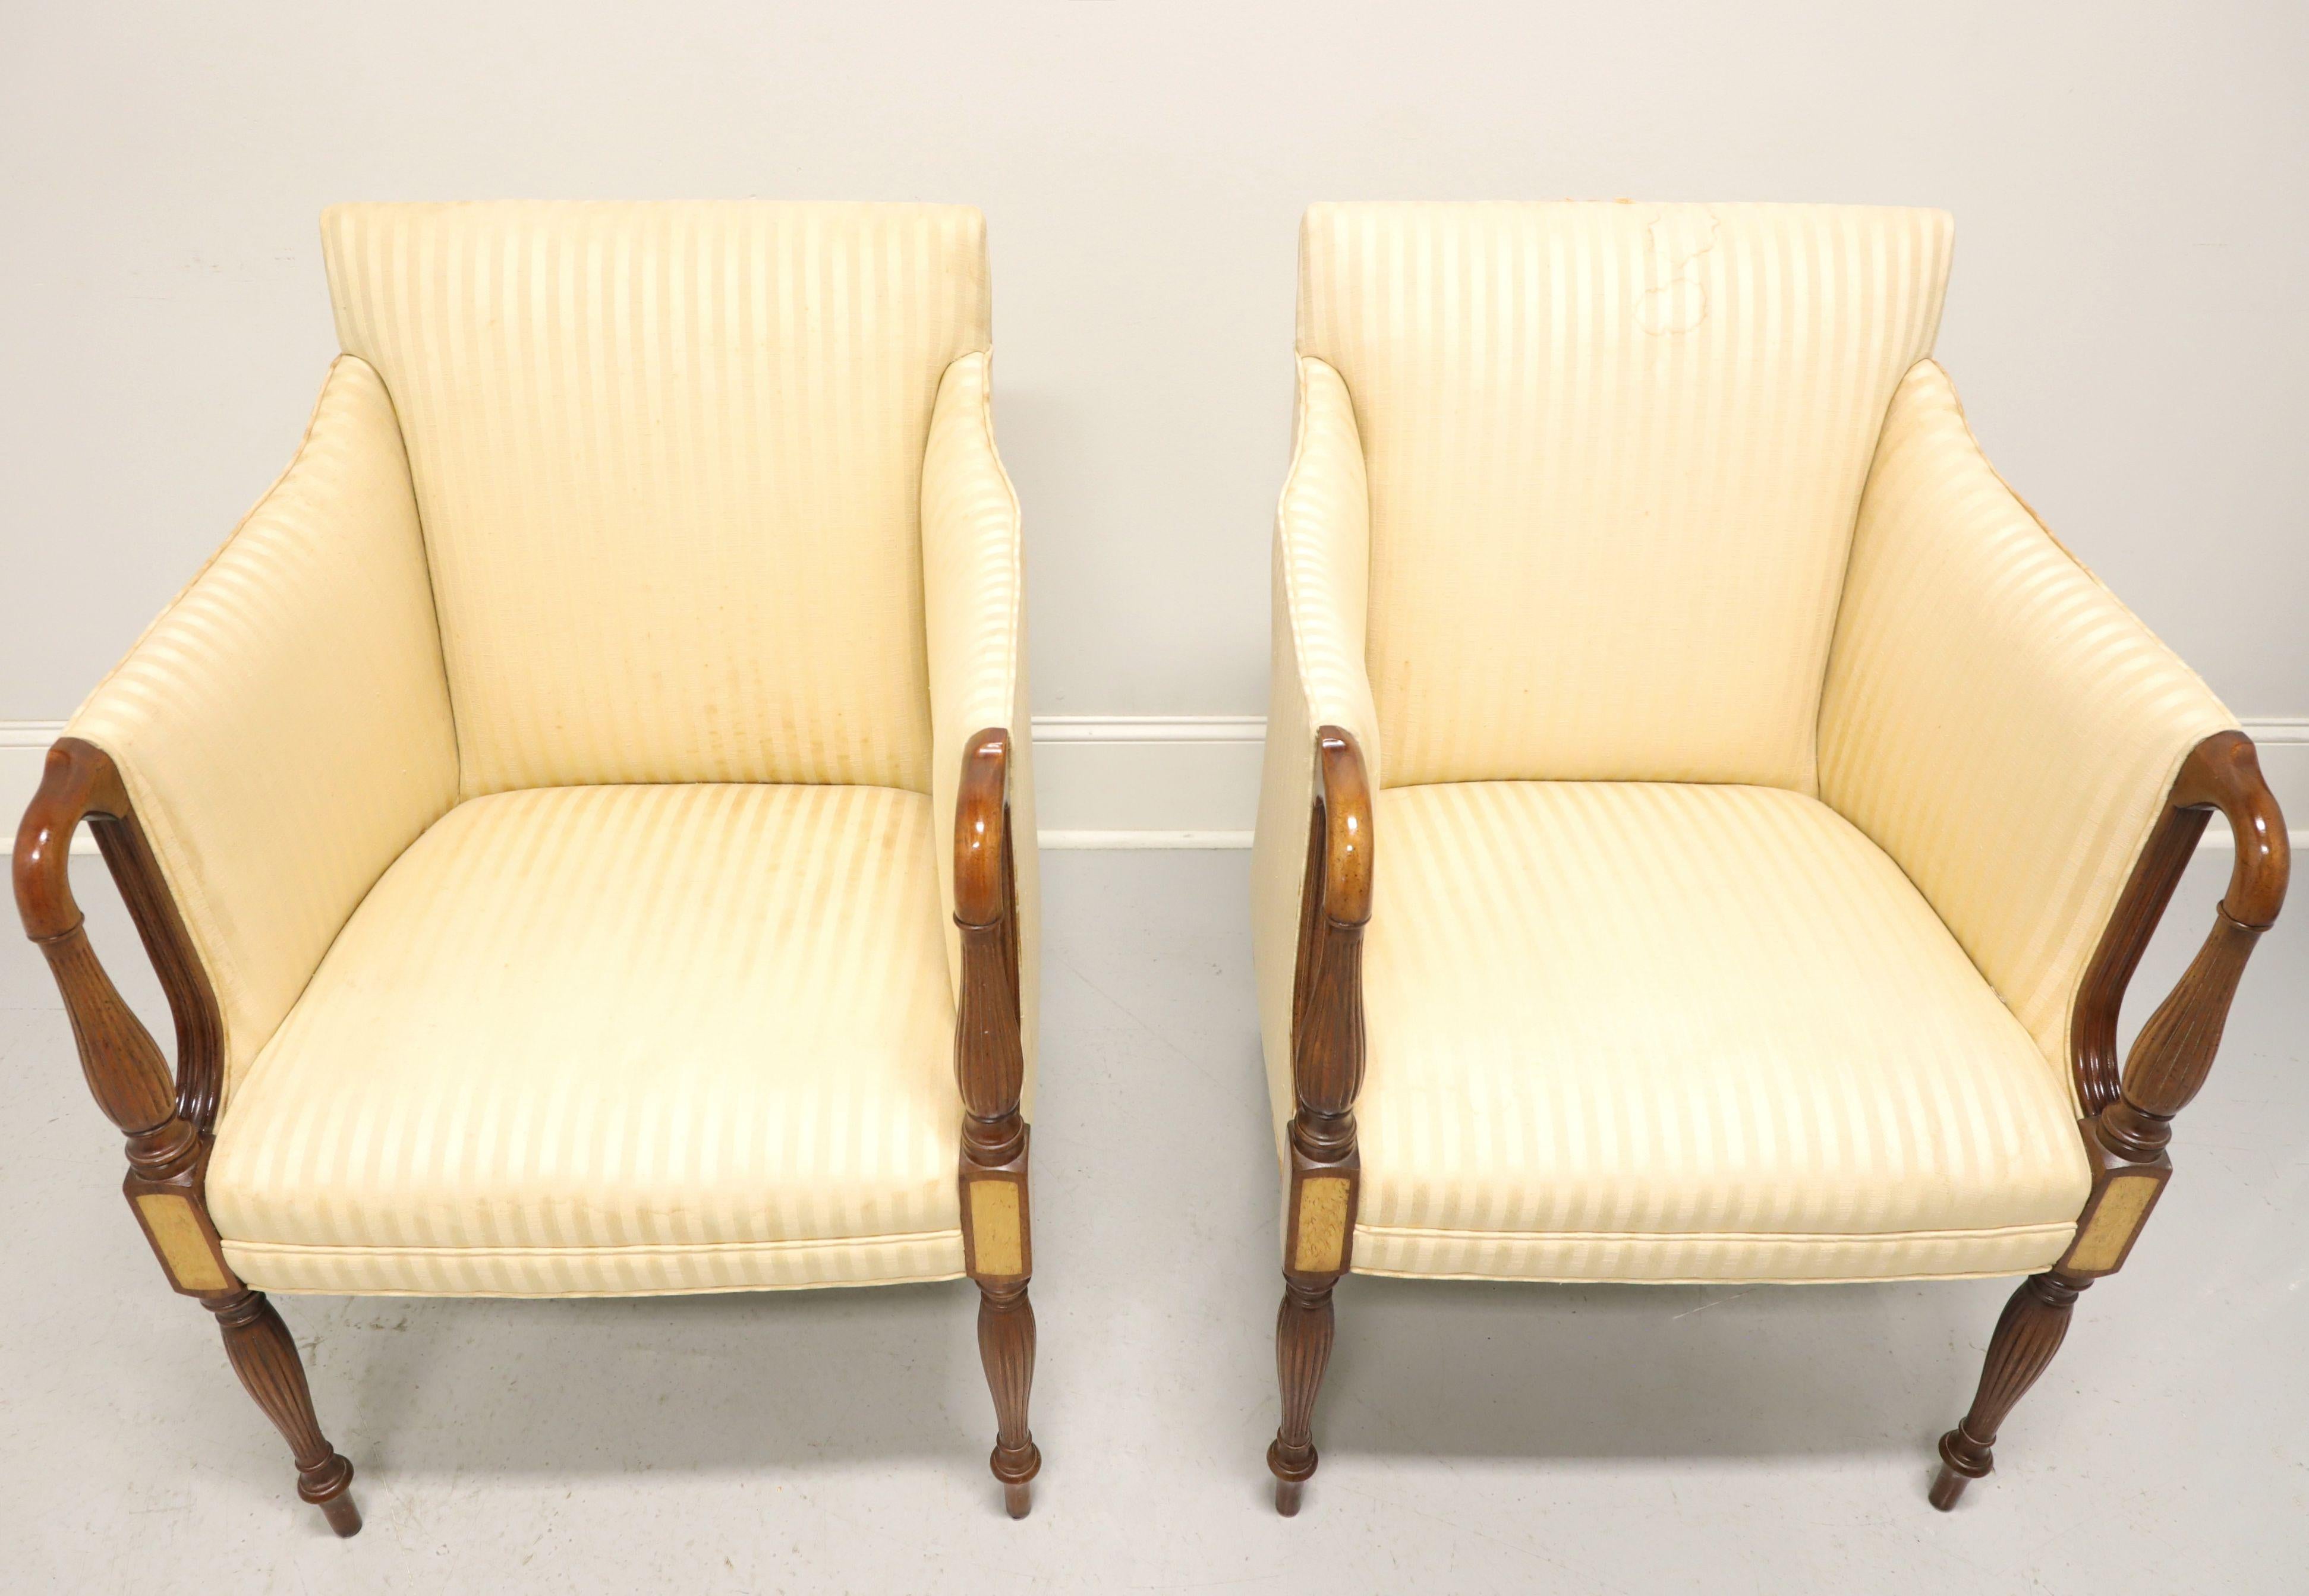 A pair of Sheraton style upholstered armchairs by Hickory Chair. Walnut with lighter color inlays to knees, curved & fluted open arms, cream color damask fabric upholstery and fluted front legs. Ready for you to have reupholstered in a fabric to